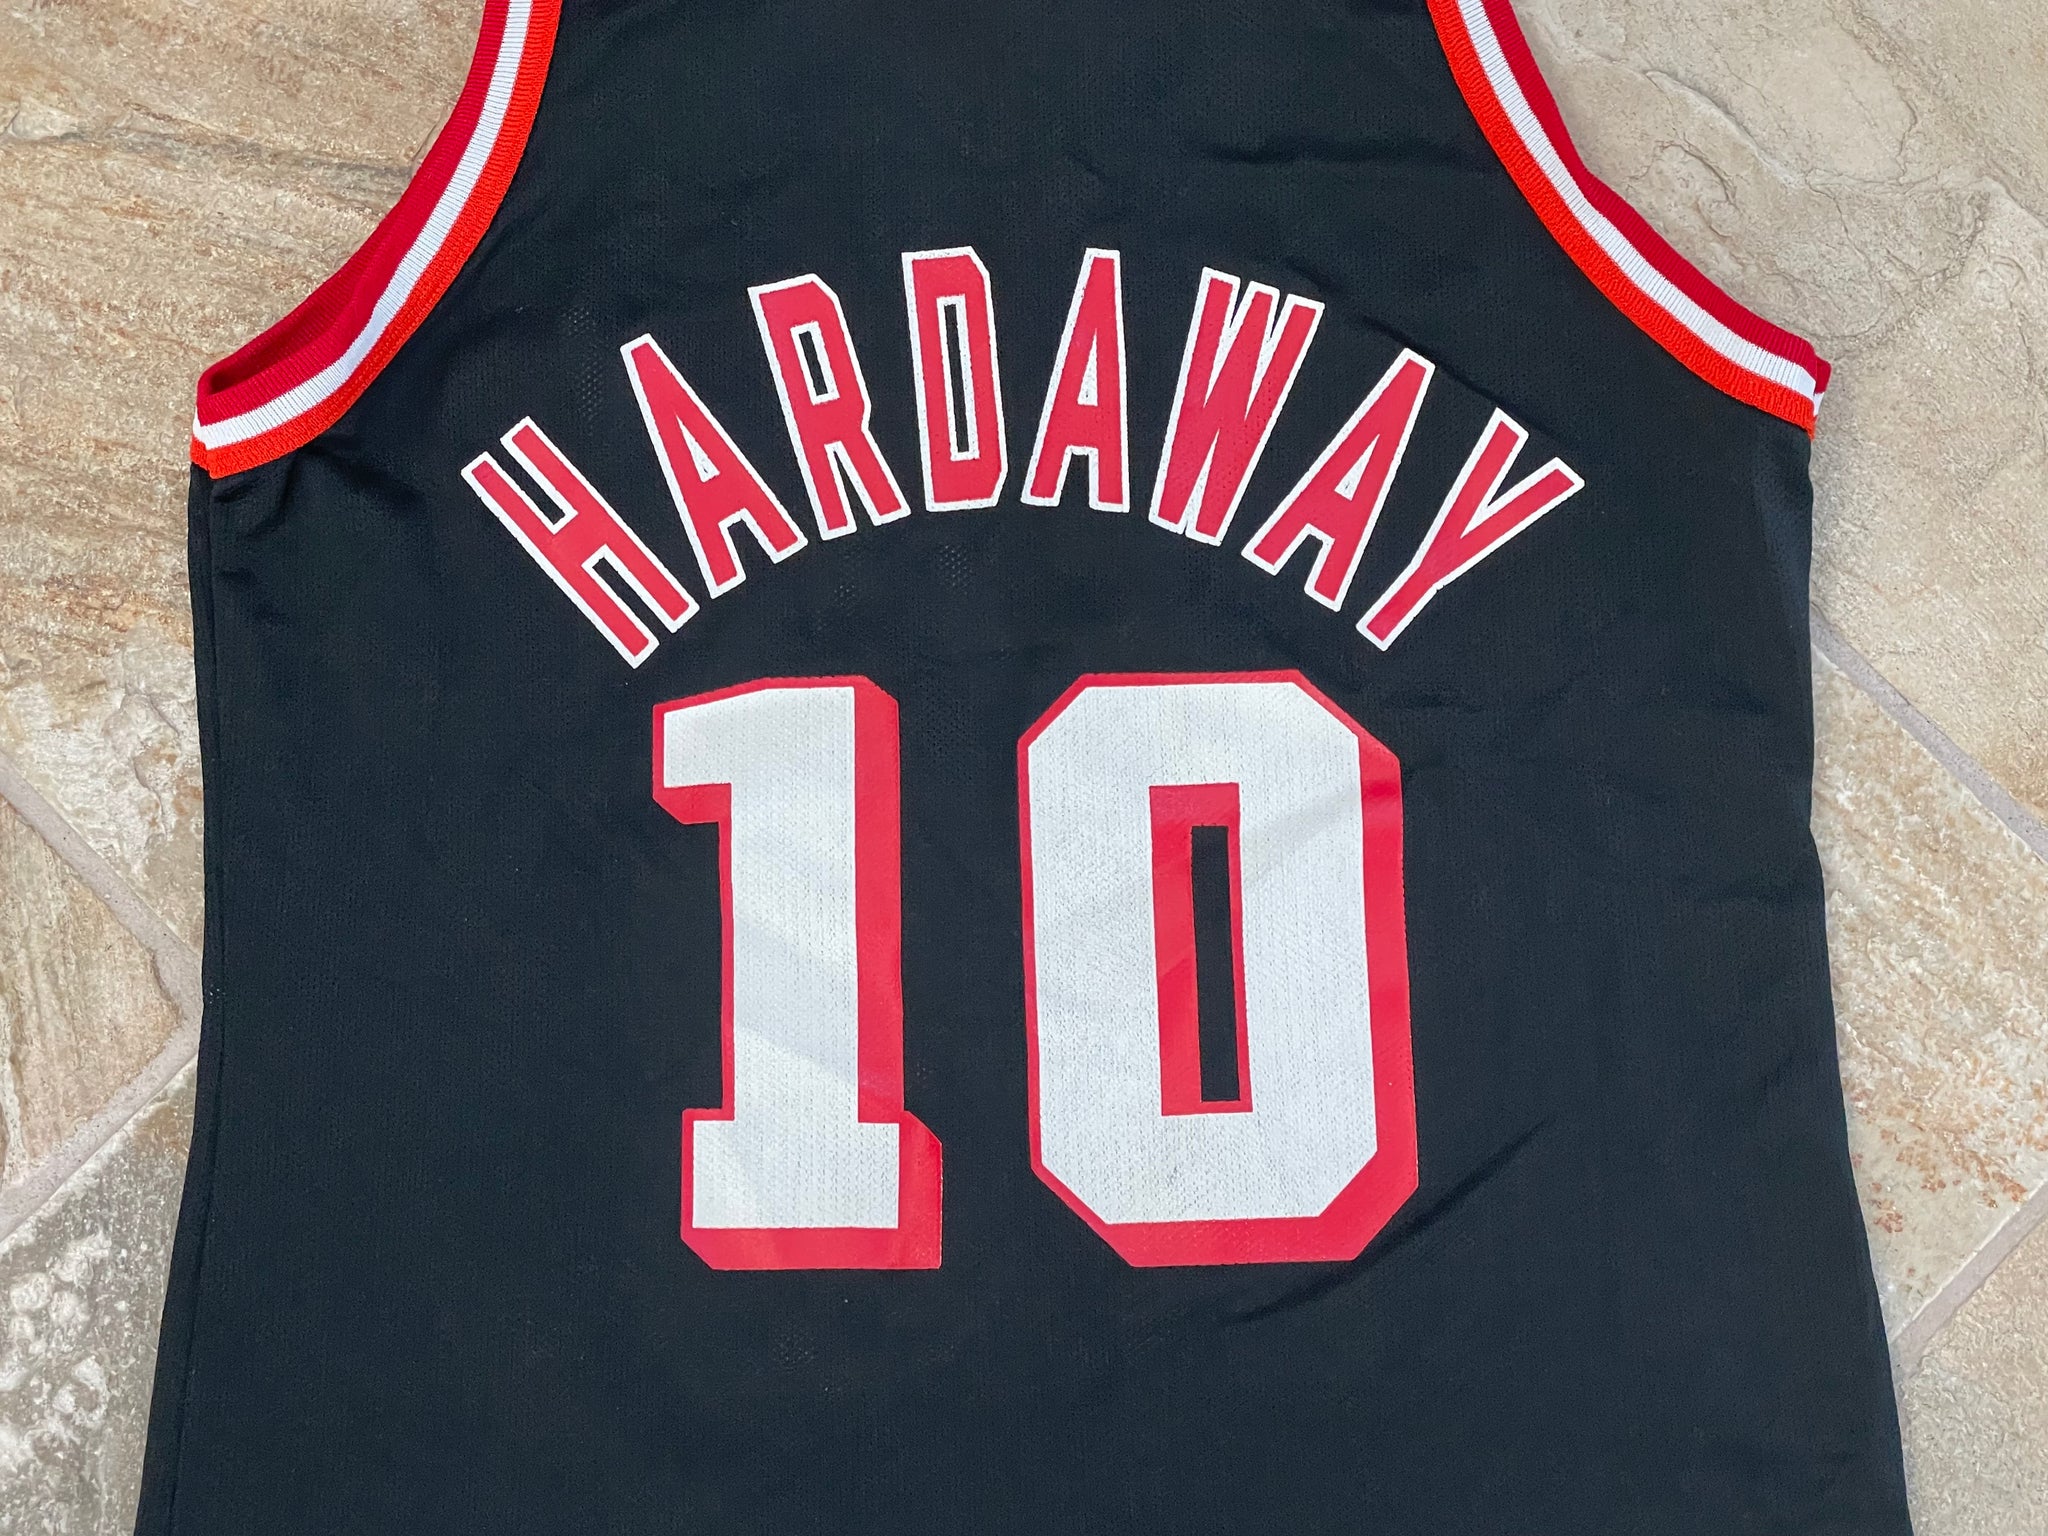 Breaking Down the Miami Heat '90s Throwback Jerseys